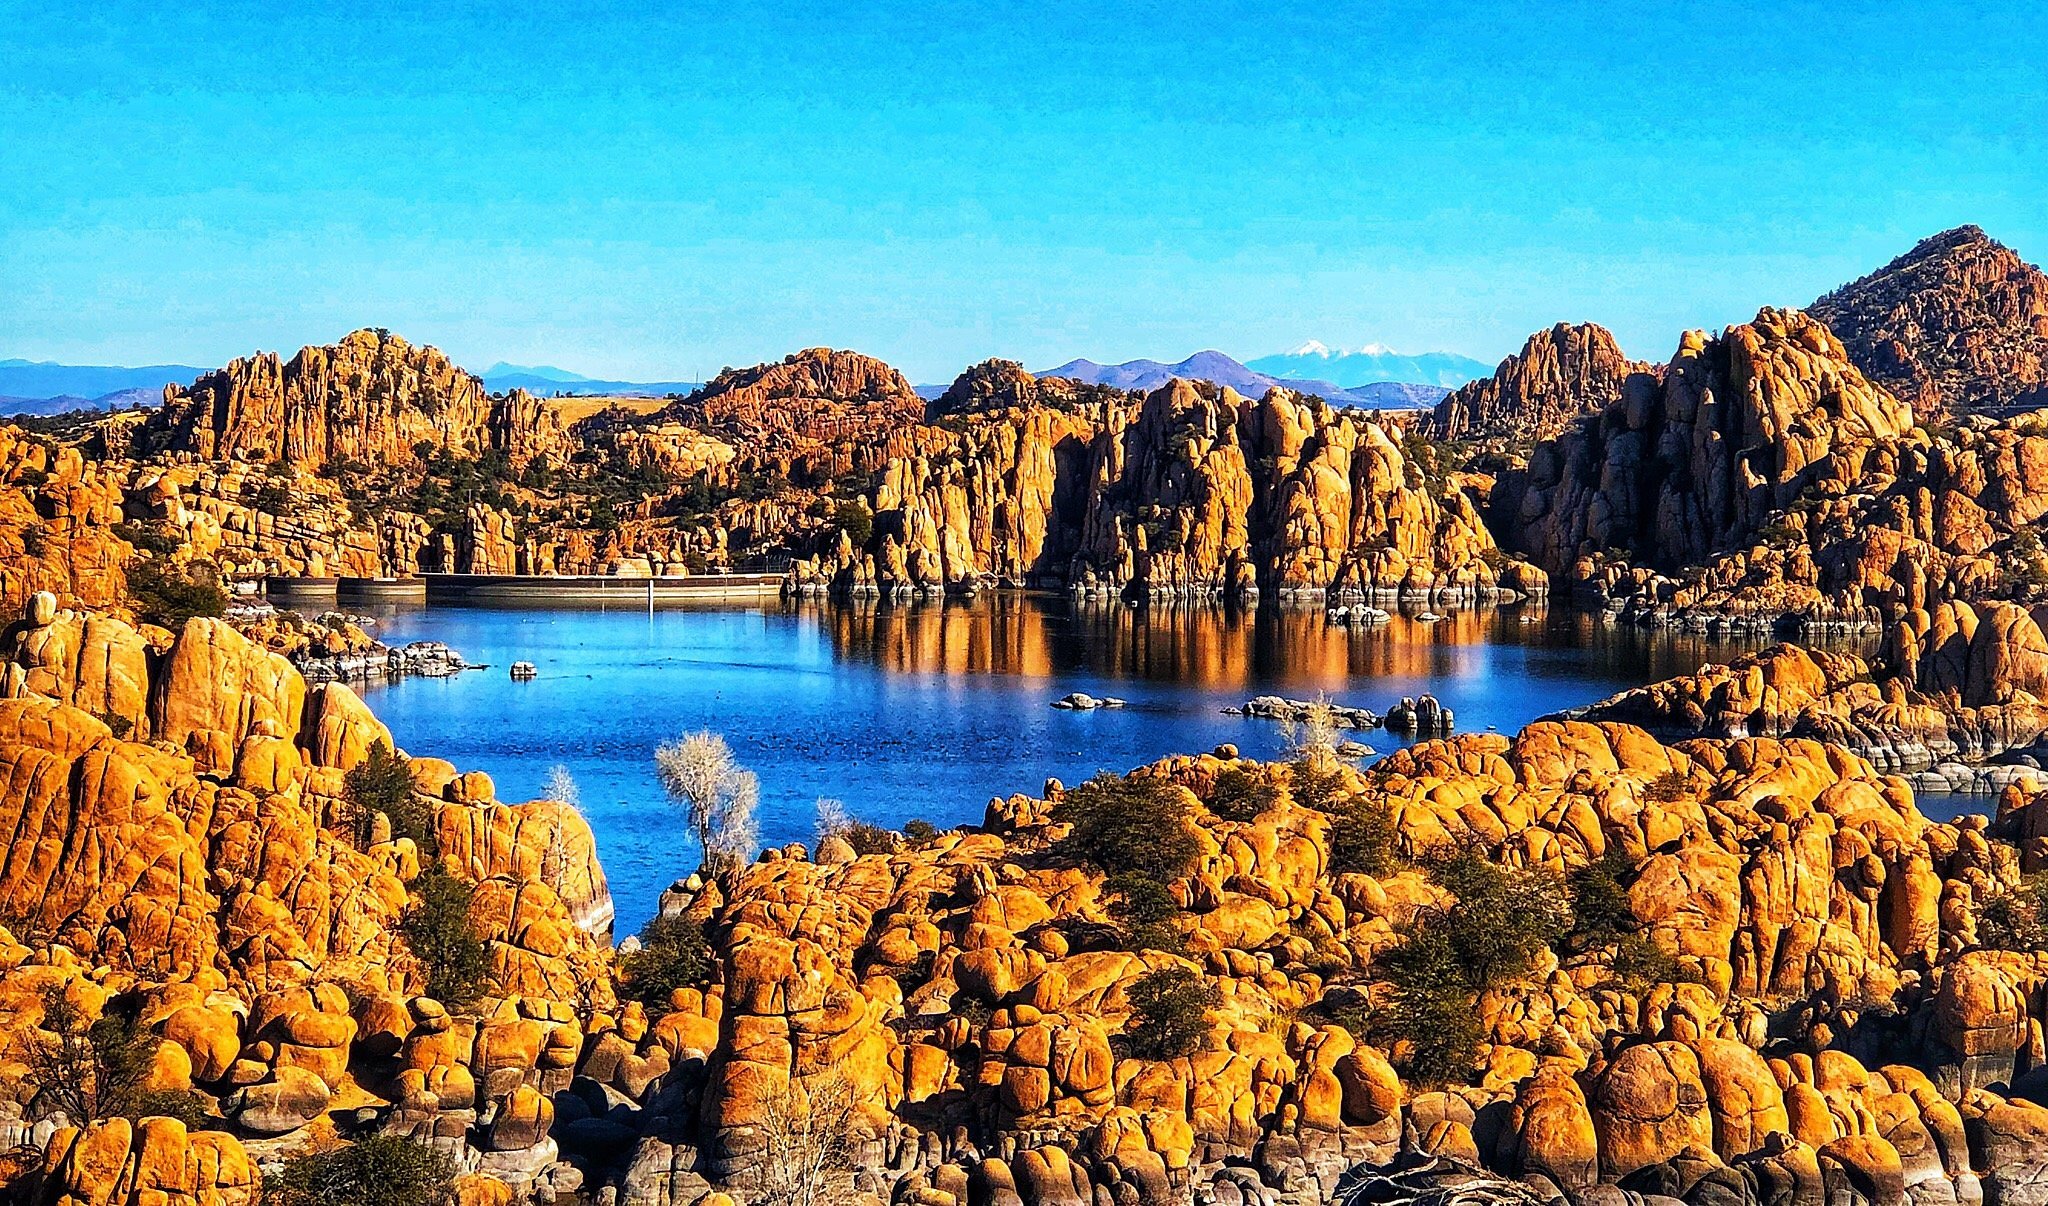 THE 10 BEST Things to Do in Arizona - 2021 (with Photos) | Tripadvisor